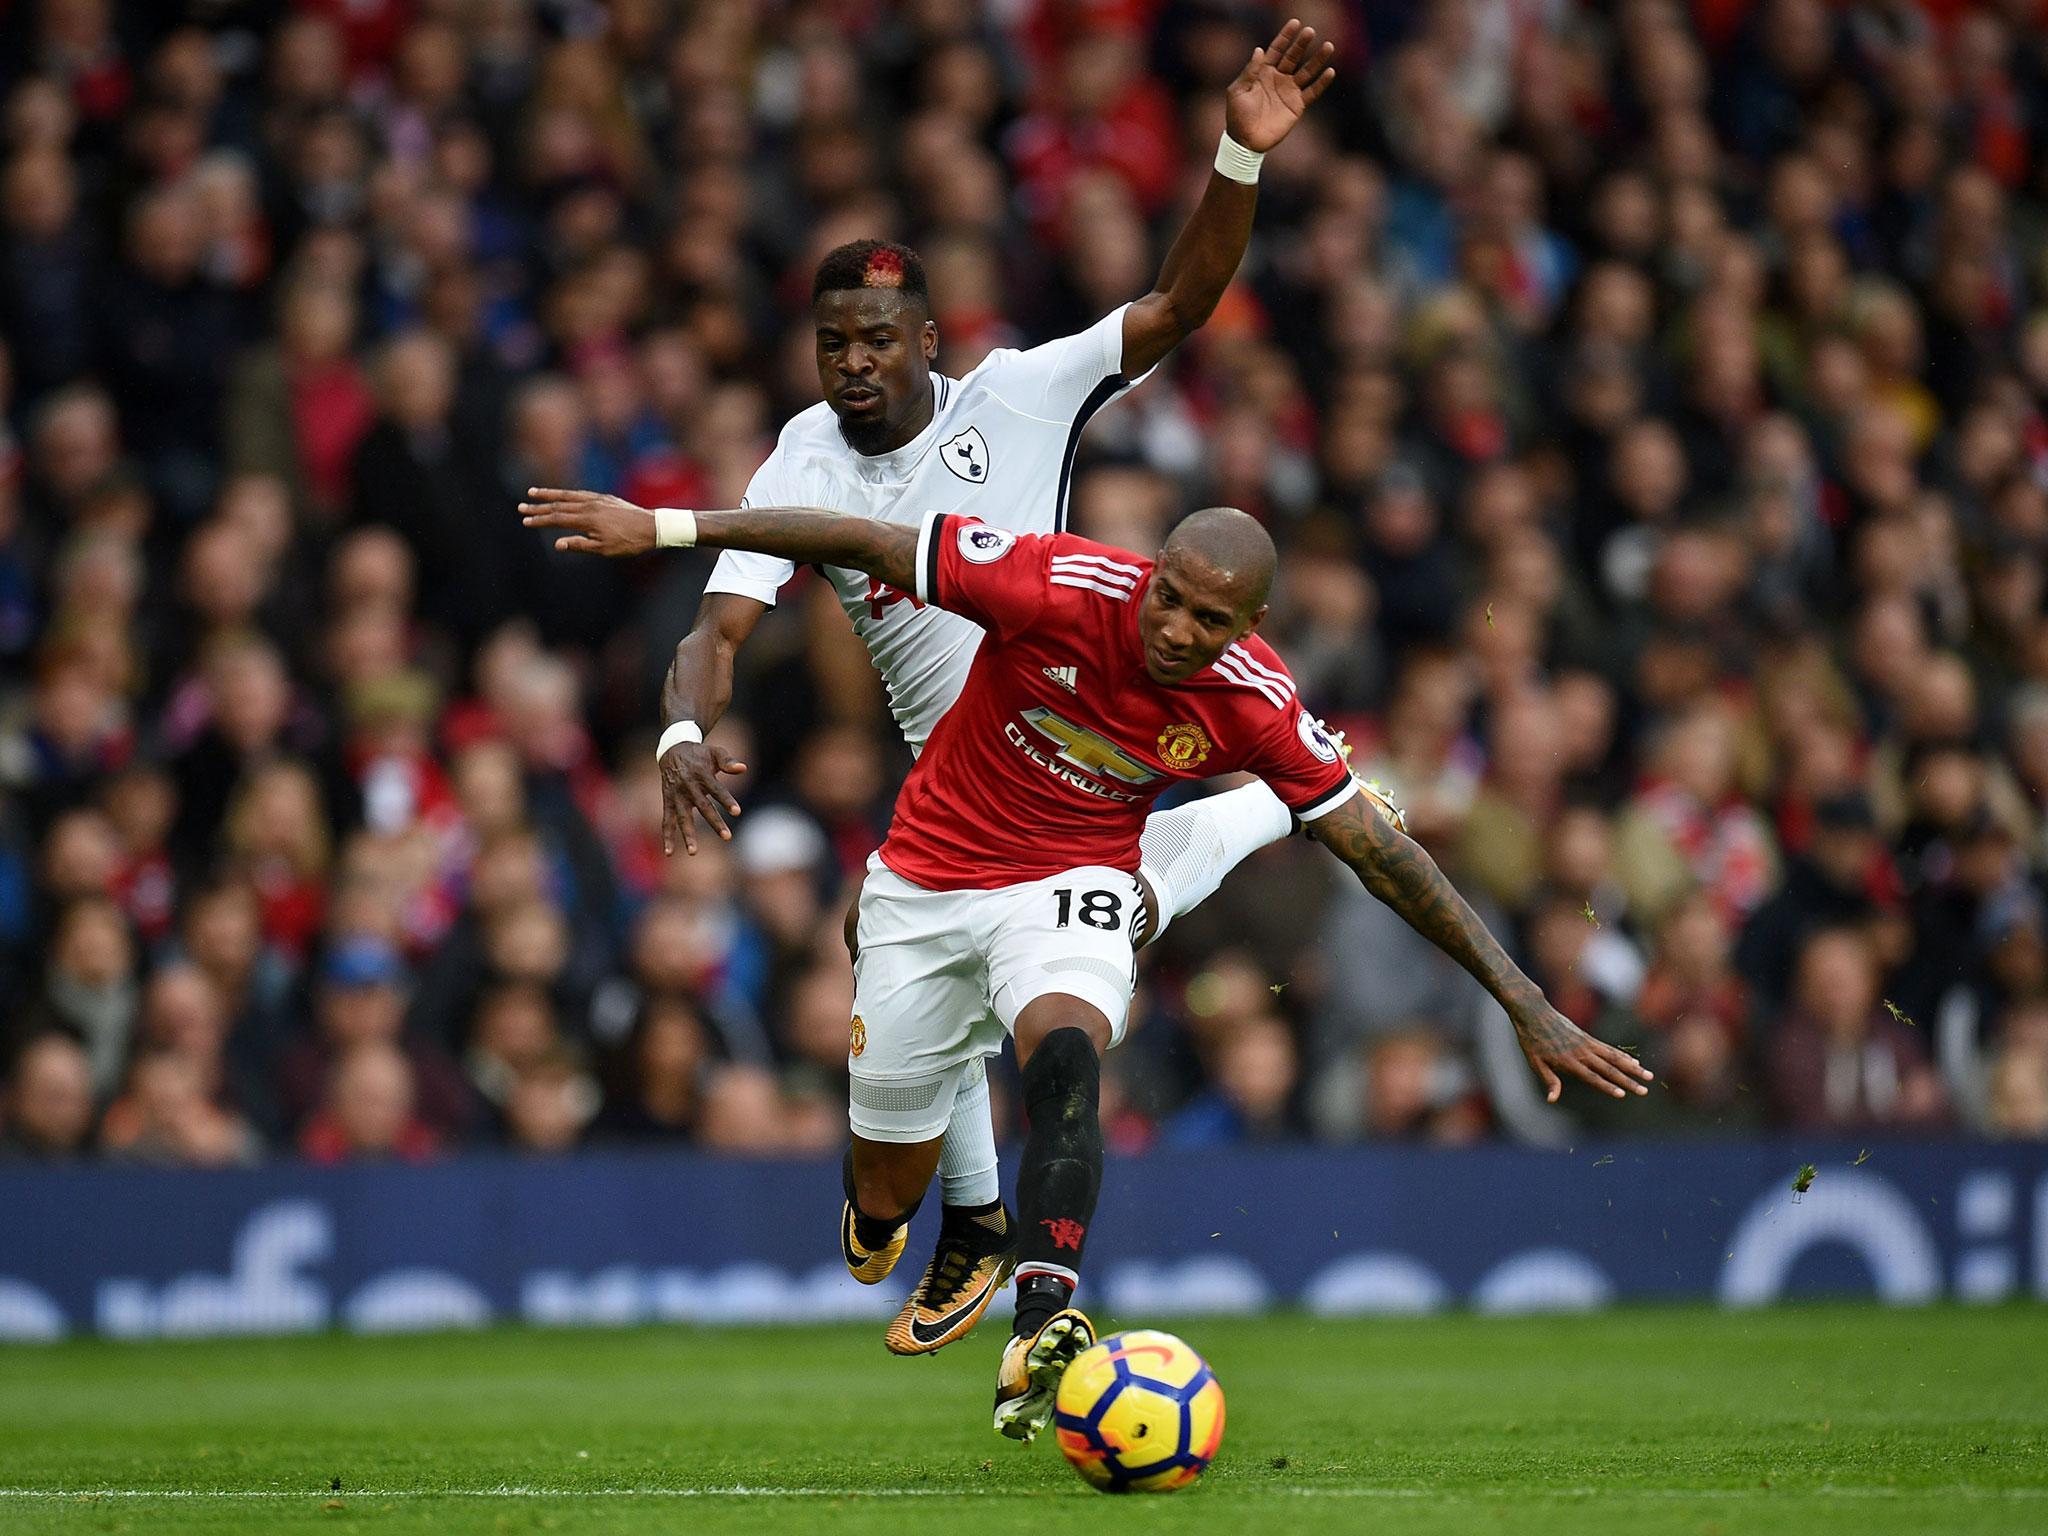 Manchester United vs Tottenham player ratings: Ashley Young